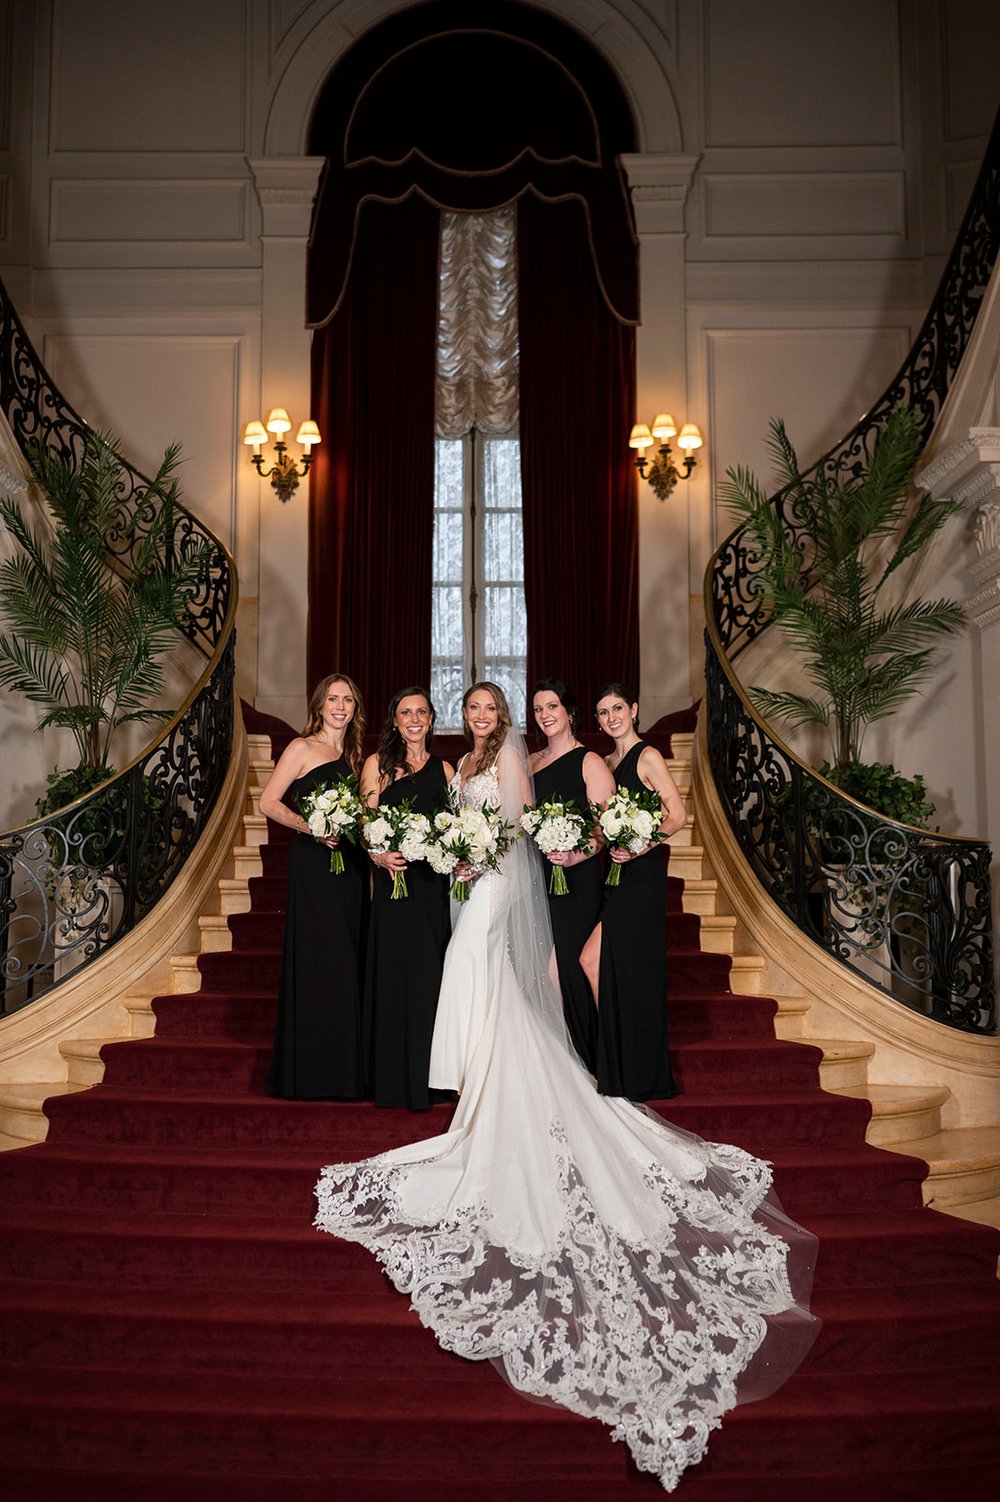  bridal party photos with bride and groom inside rosecliff mansion 